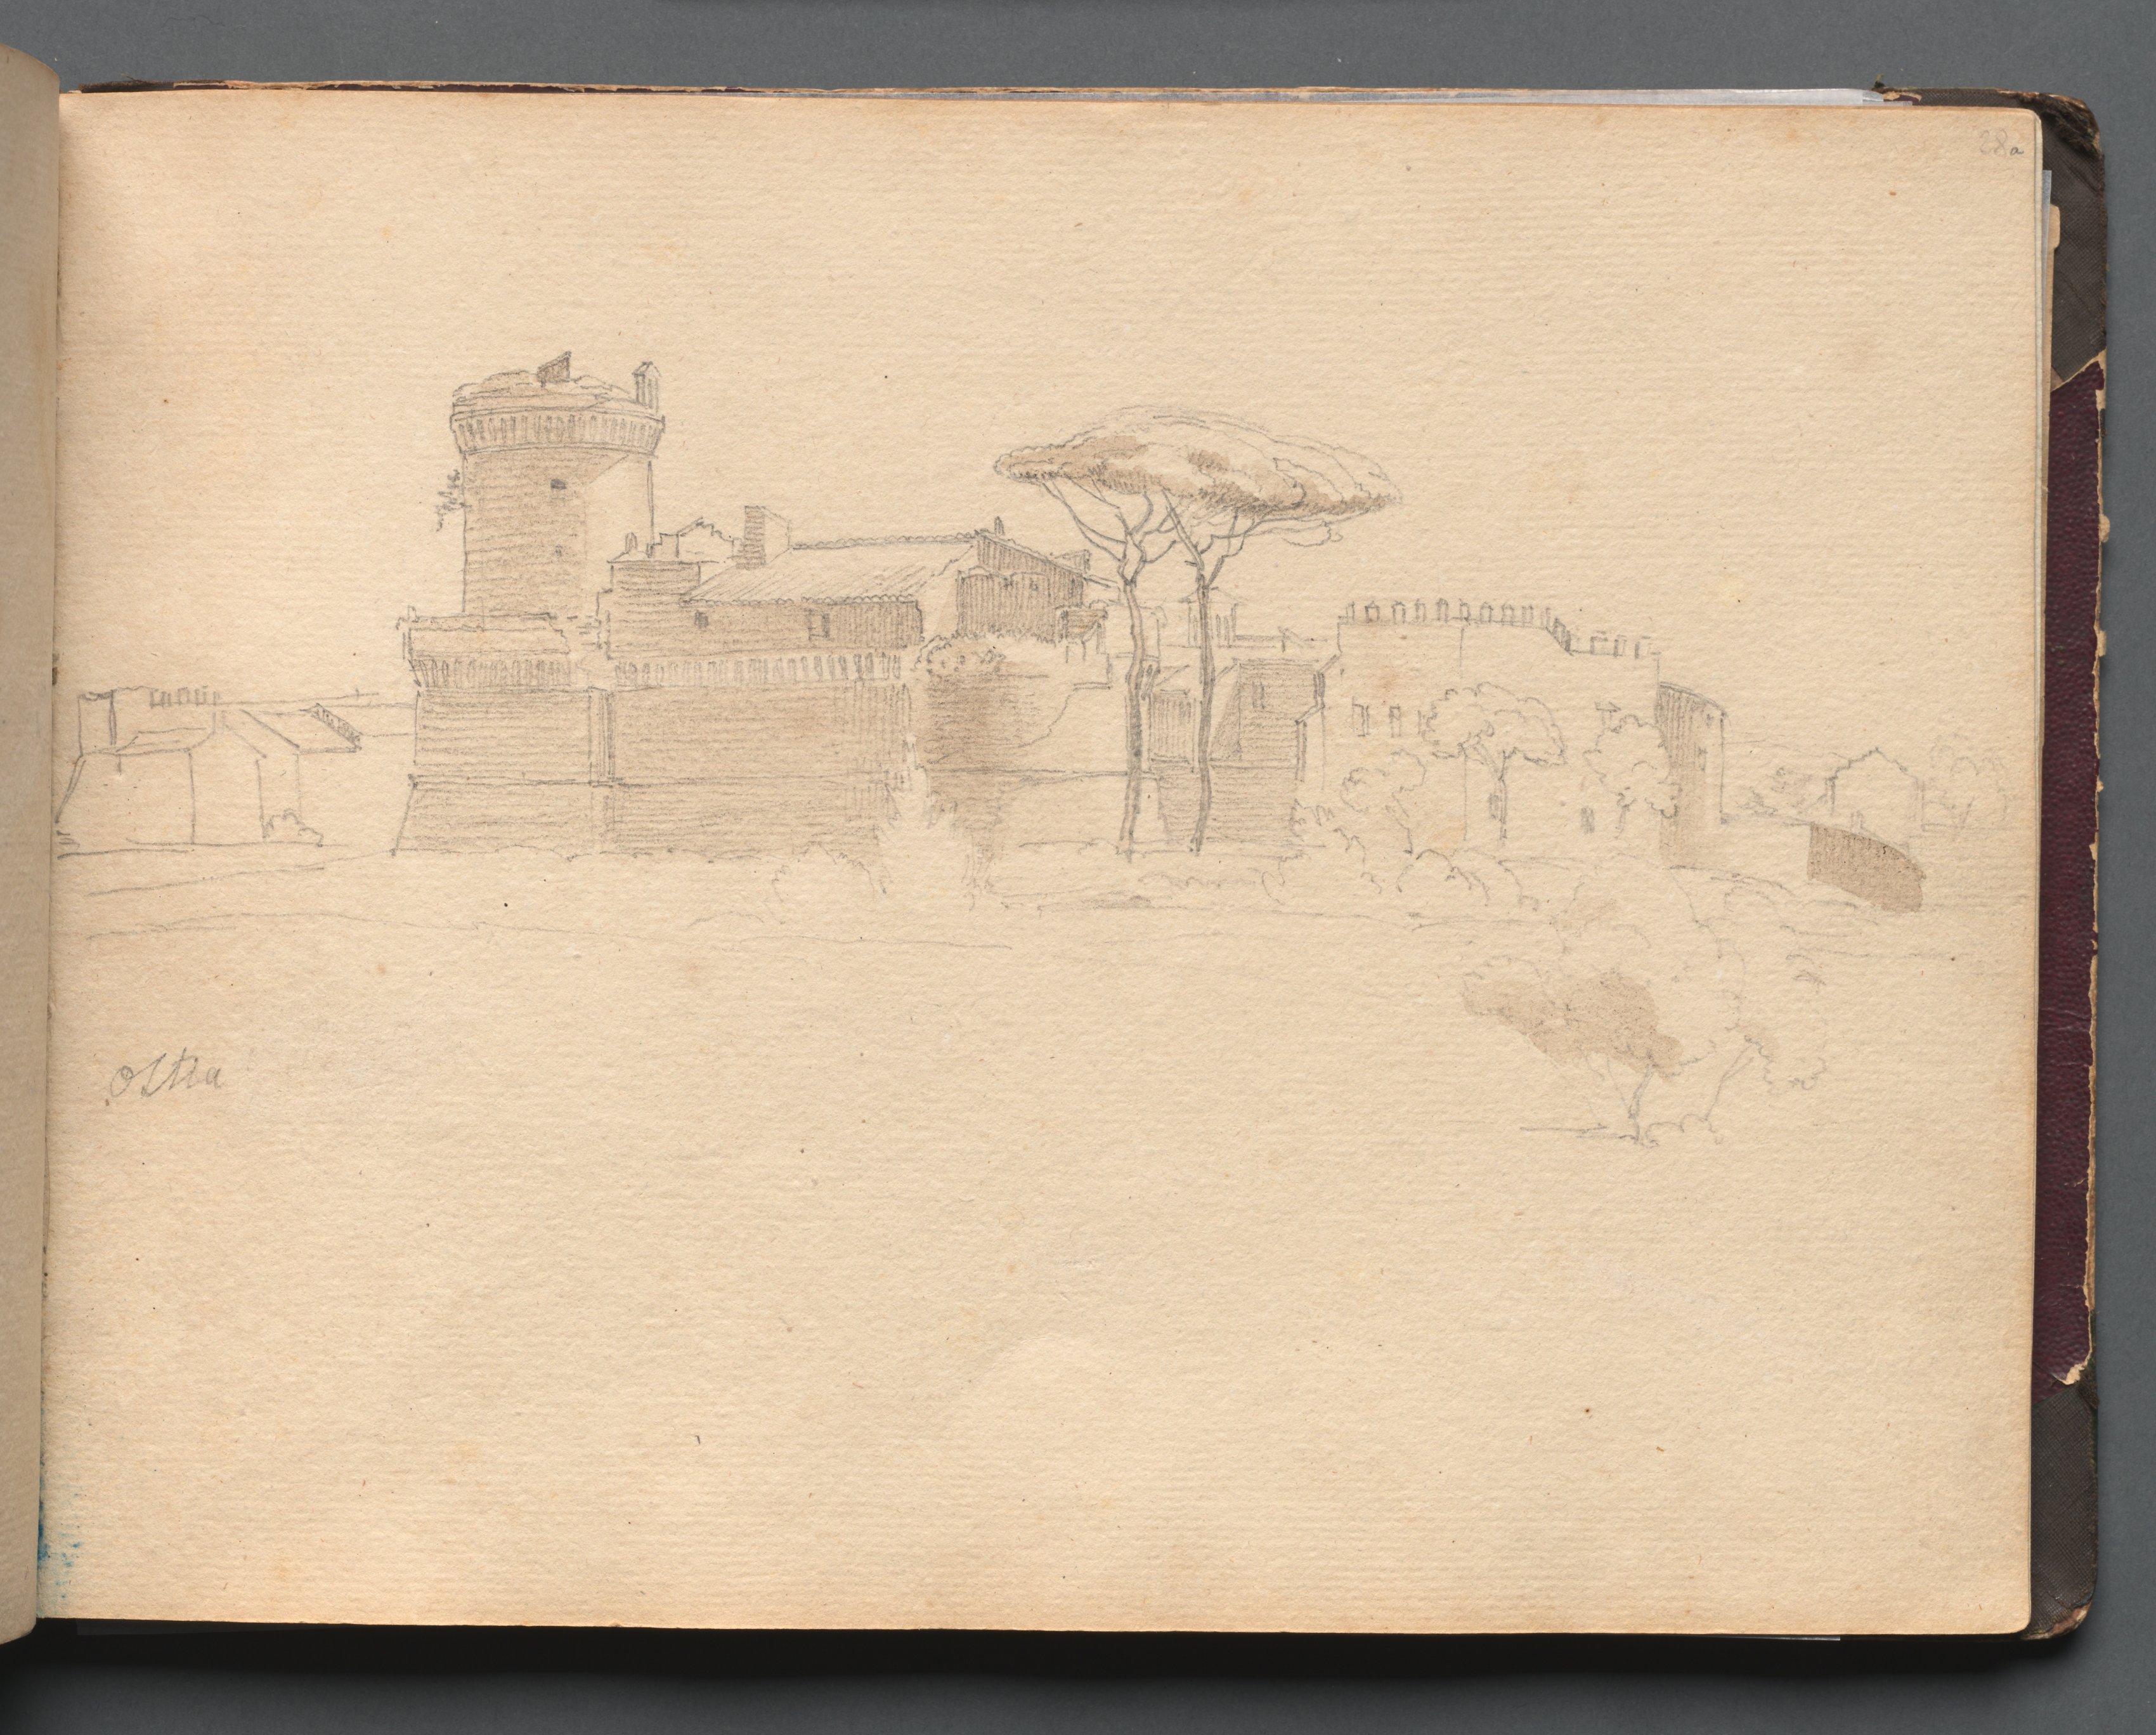 Album with Views of Rome and Surroundings, Landscape Studies, page 28a: "Ostia" 